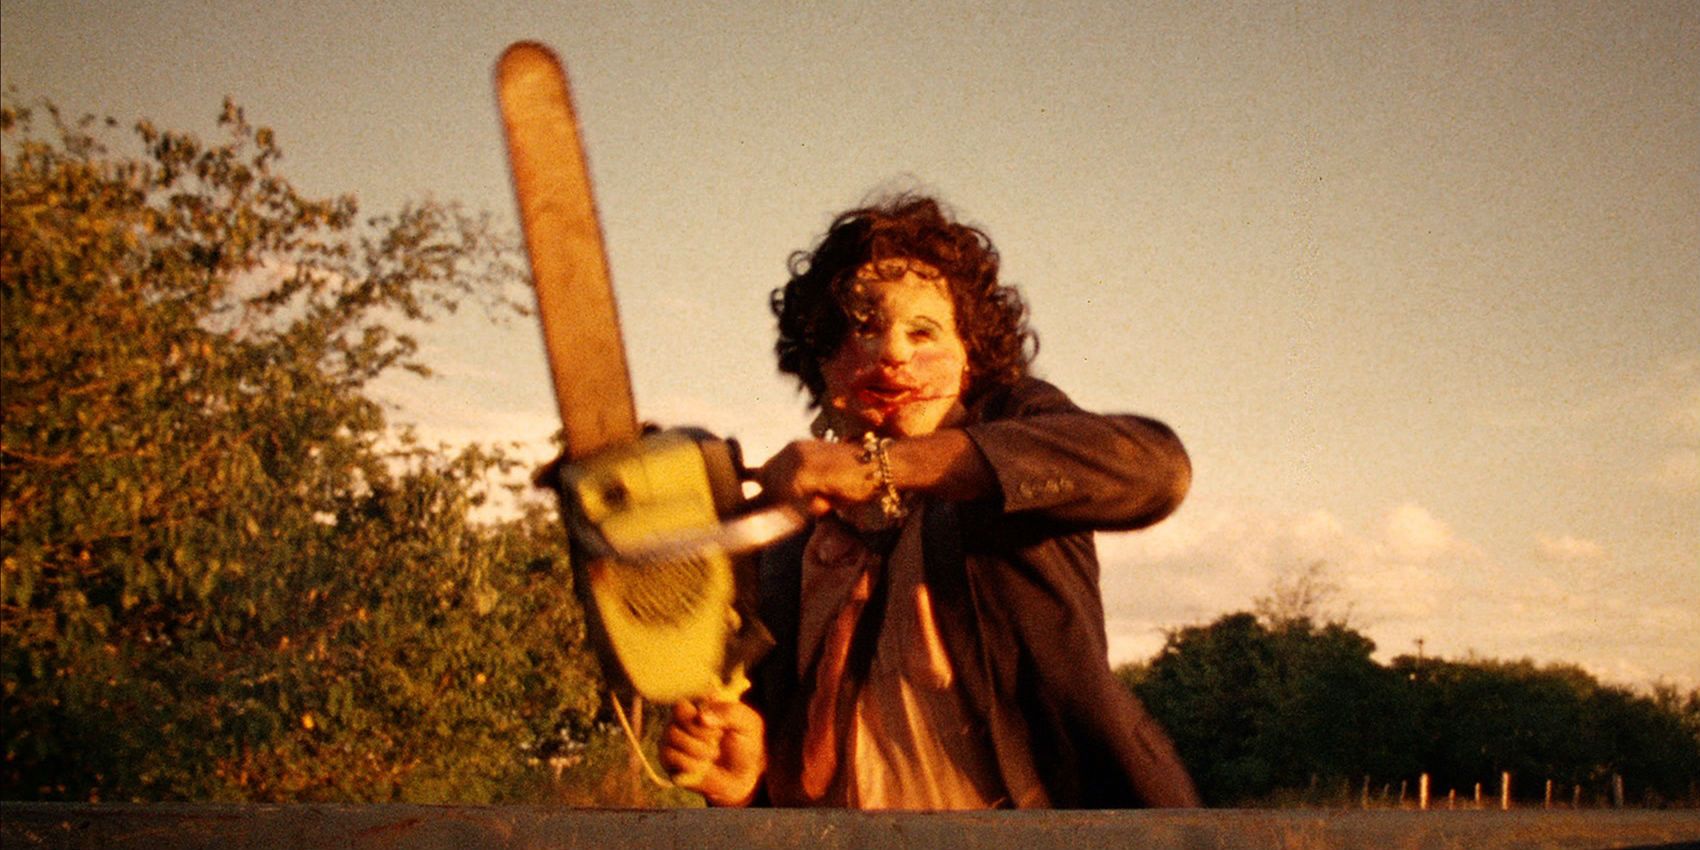 Leatherface holding his chainsaw aloft in The Texas Chainsaw Massacre